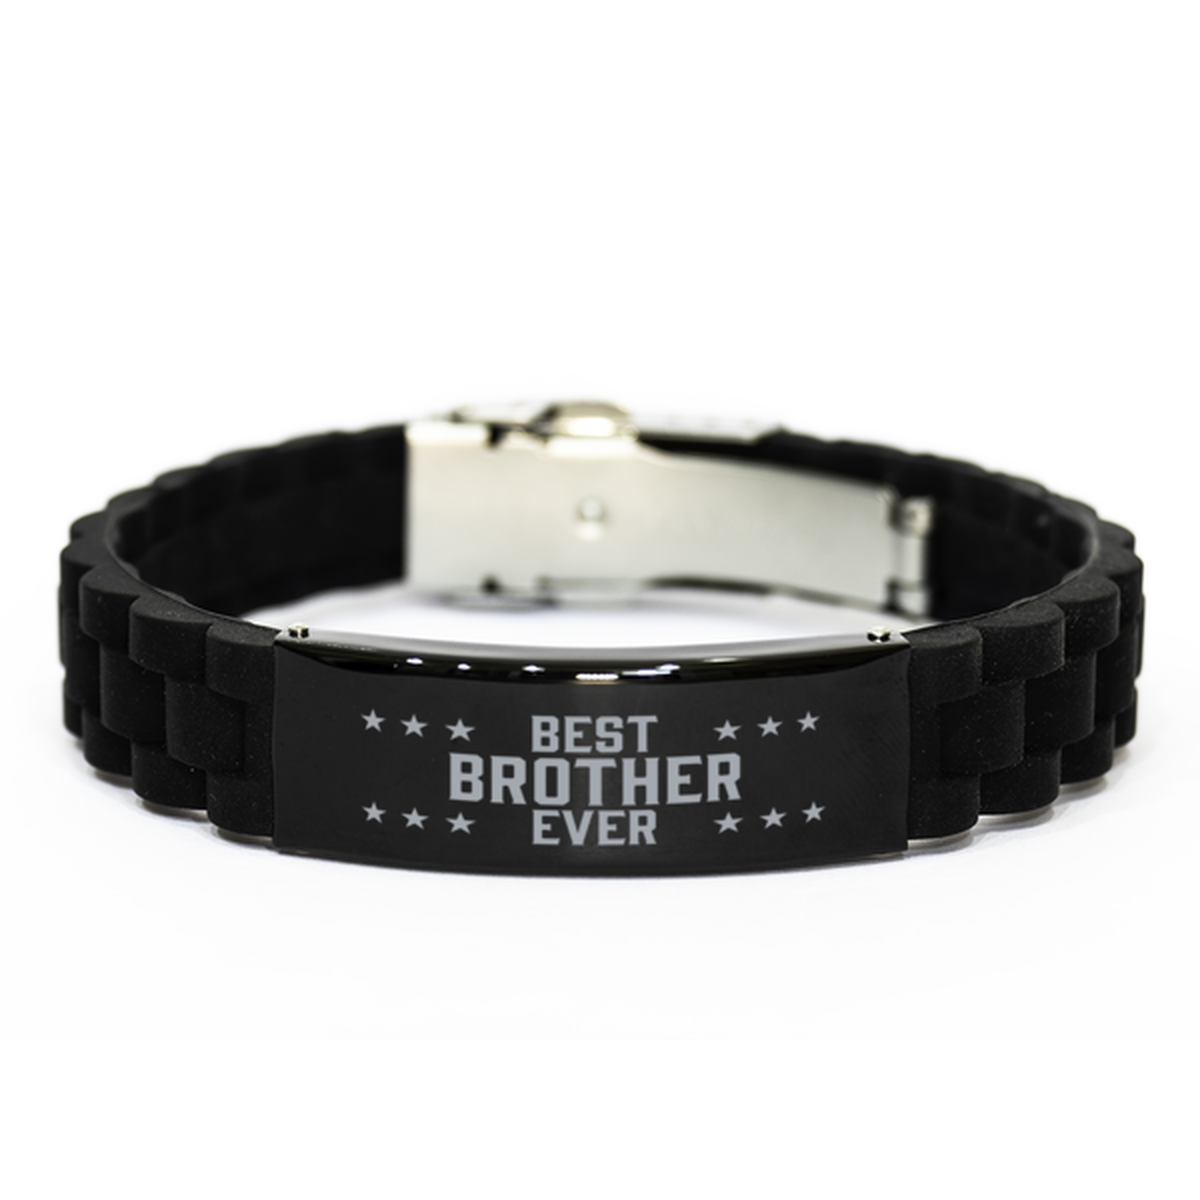 Best Brother Ever Brother Gifts, Funny Black Engraved Bracelet For Brother, Family Gifts For Men